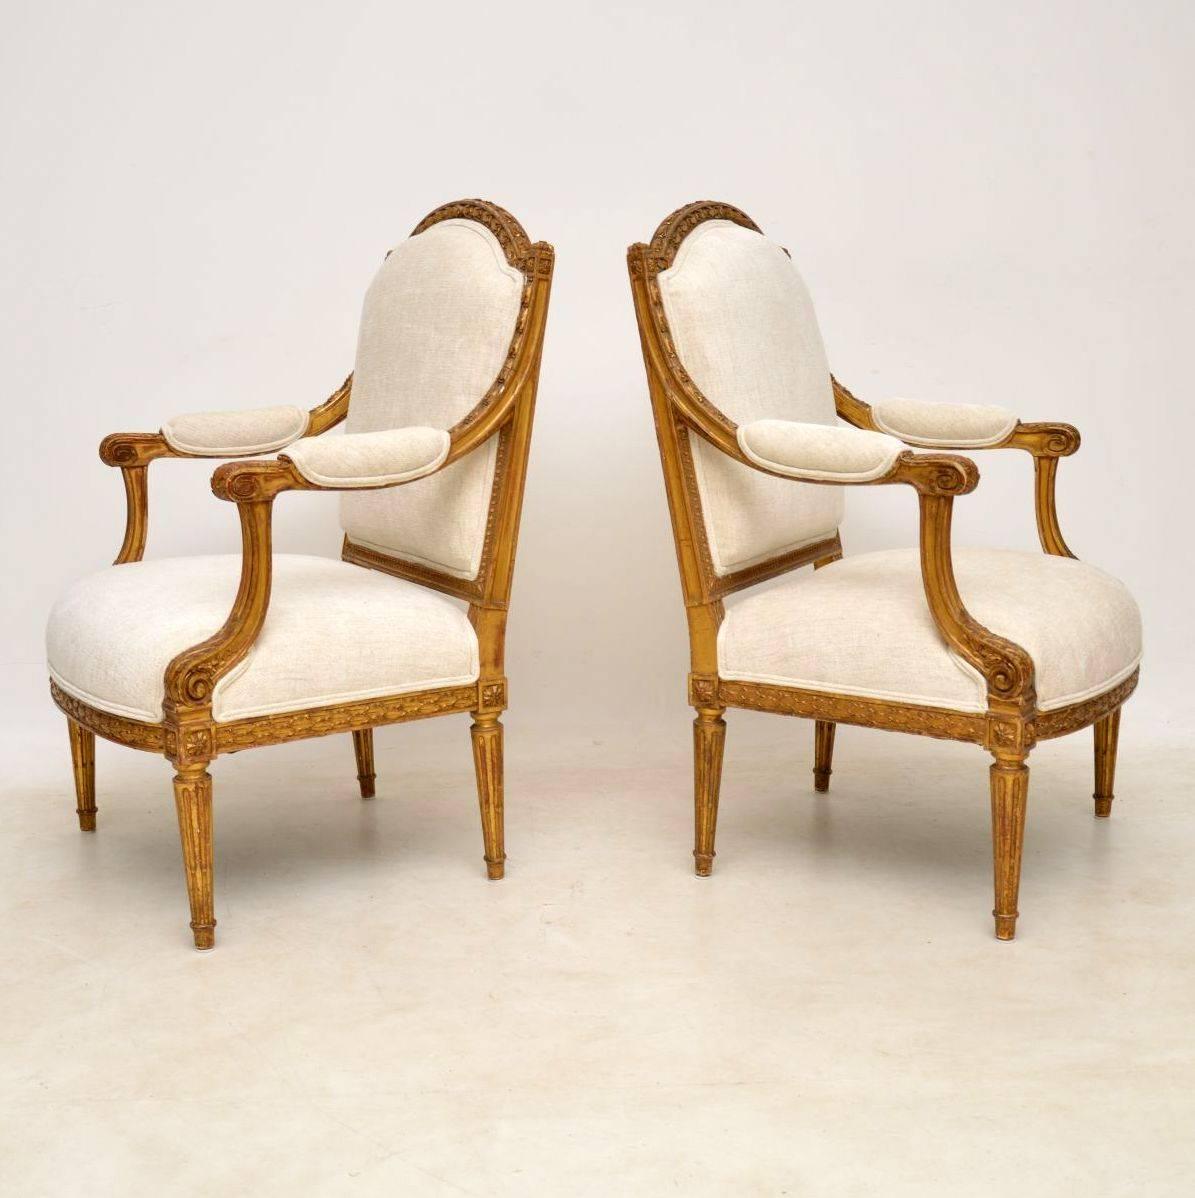 This pair of French antique giltwood armchairs are wonderful quality and in excellent original condition. They have very generous proportions and have just been re-upholstered in a neutral fabric. The frames are beautifully carved all-over and the